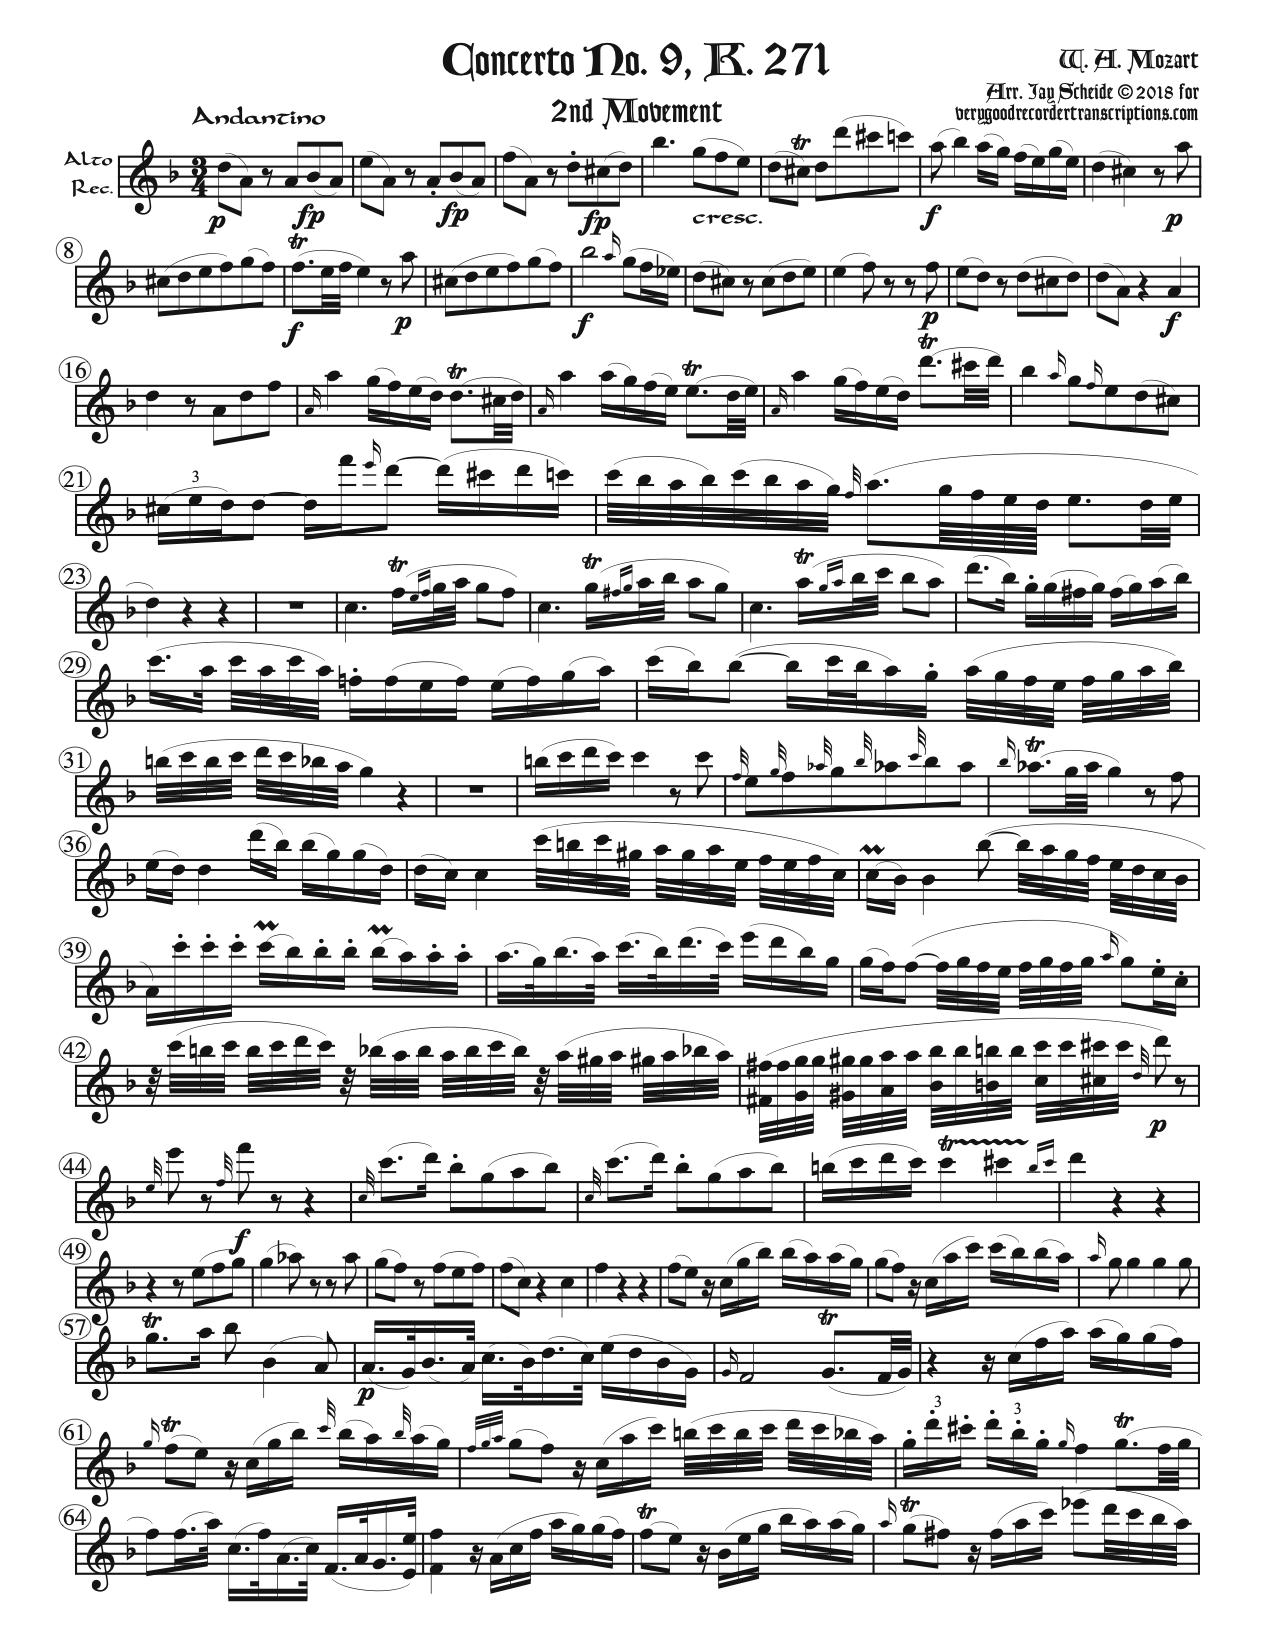 Five slow movements from the Piano Concertos